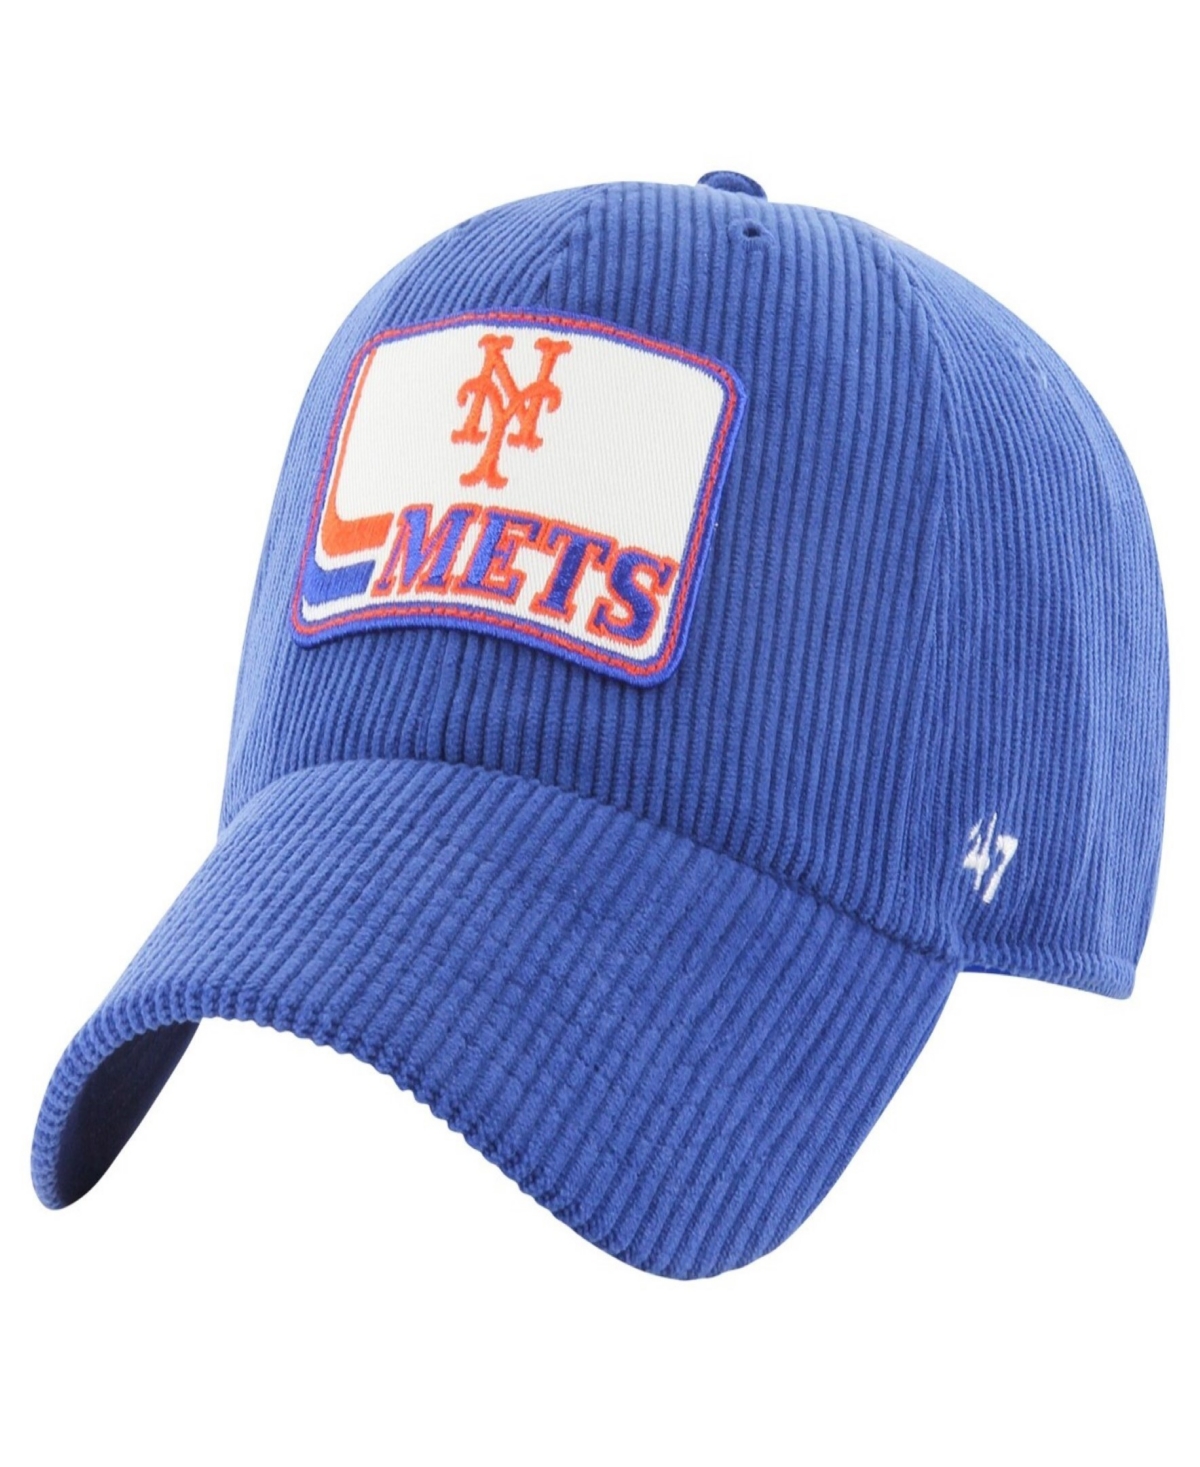 47 Brand Men's Royal New York Mets Wax Pack Collection Corduroy Clean Up Adjustable Hat - Royal